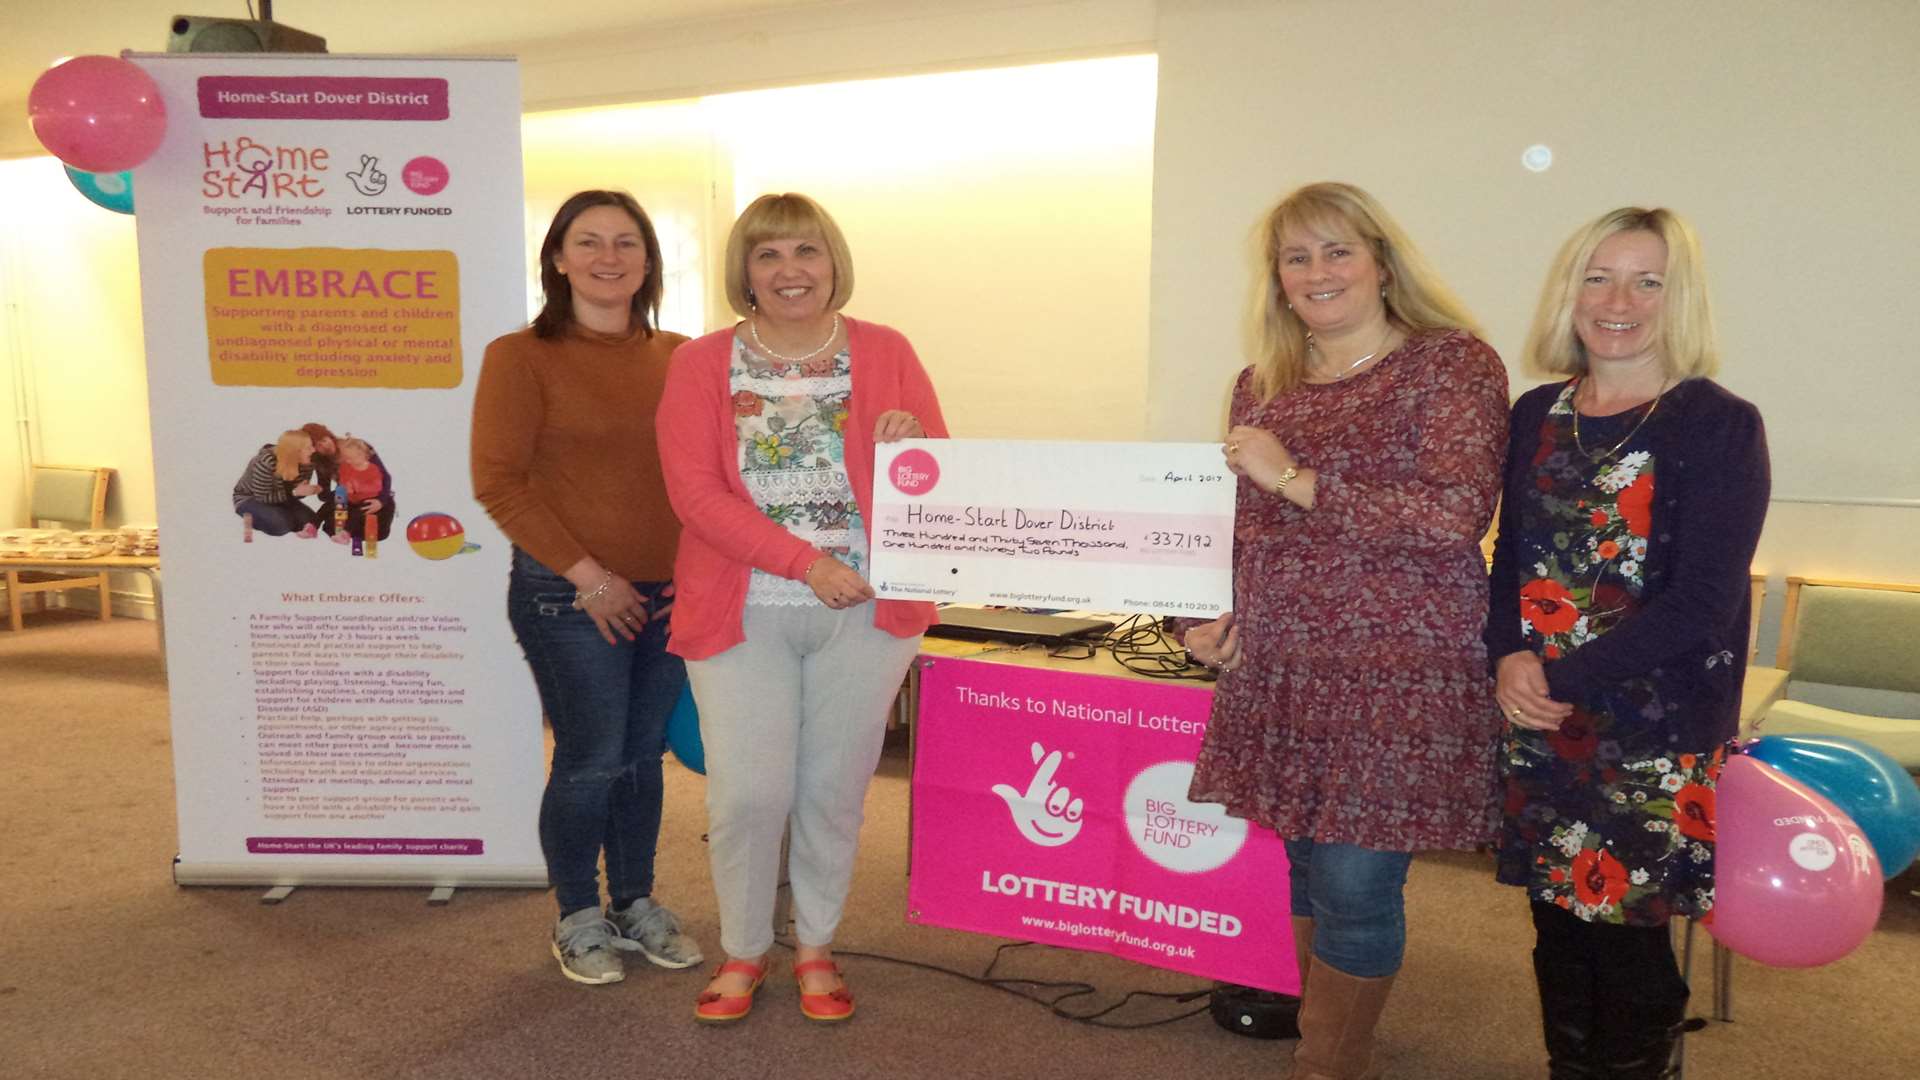 Home-Start Dover District, which has received a Big Lottery grant. Pictured, from left, are Victoria Weller, Tracy Perrow, Suzanne Letchford and Claire Coombes.